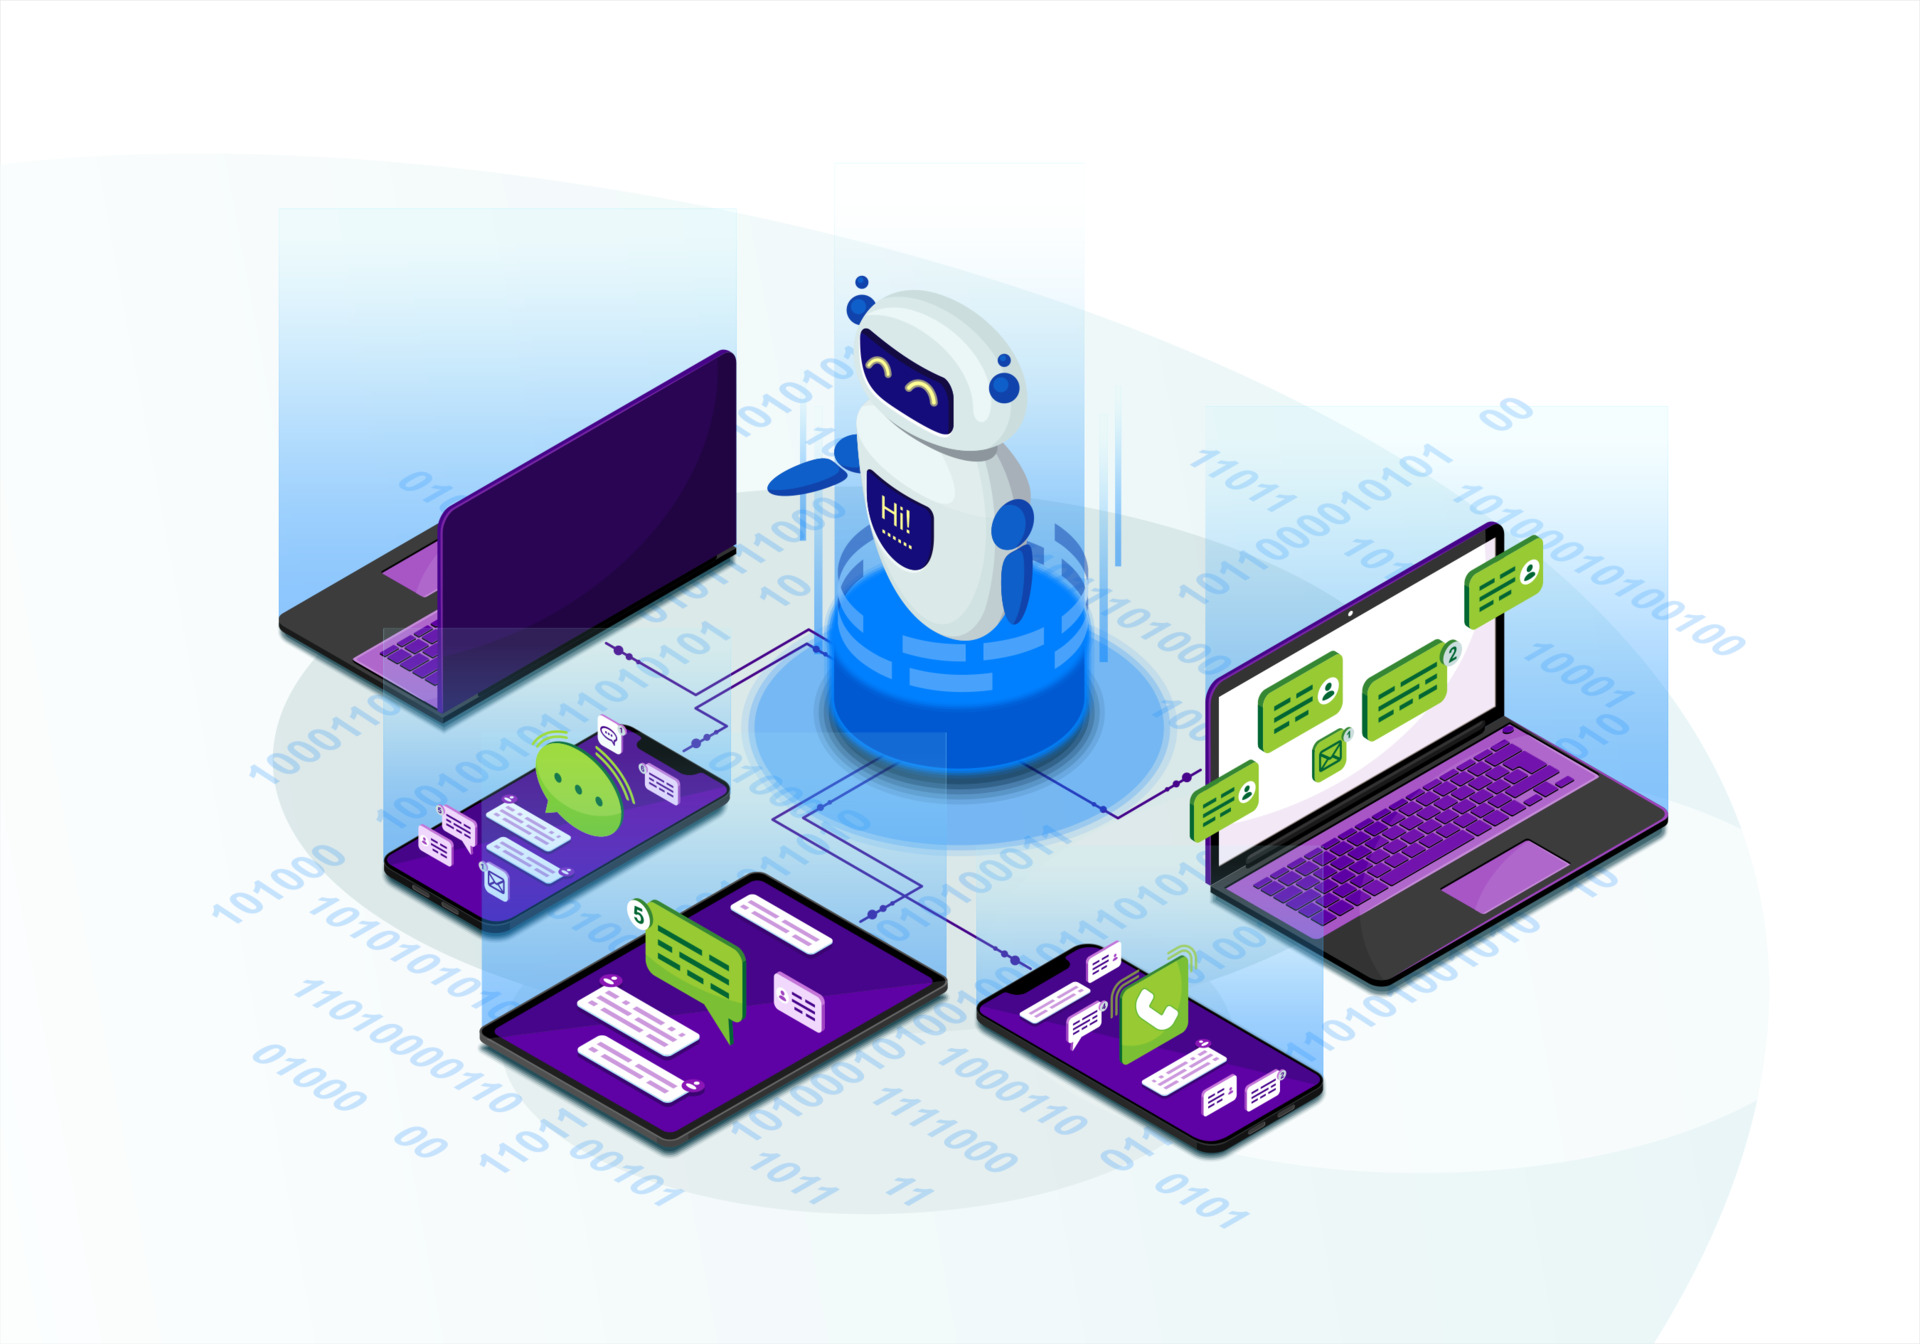 vecteezy_chatbot-isometric-vector-illustration-chat-bot-receiving_4451089